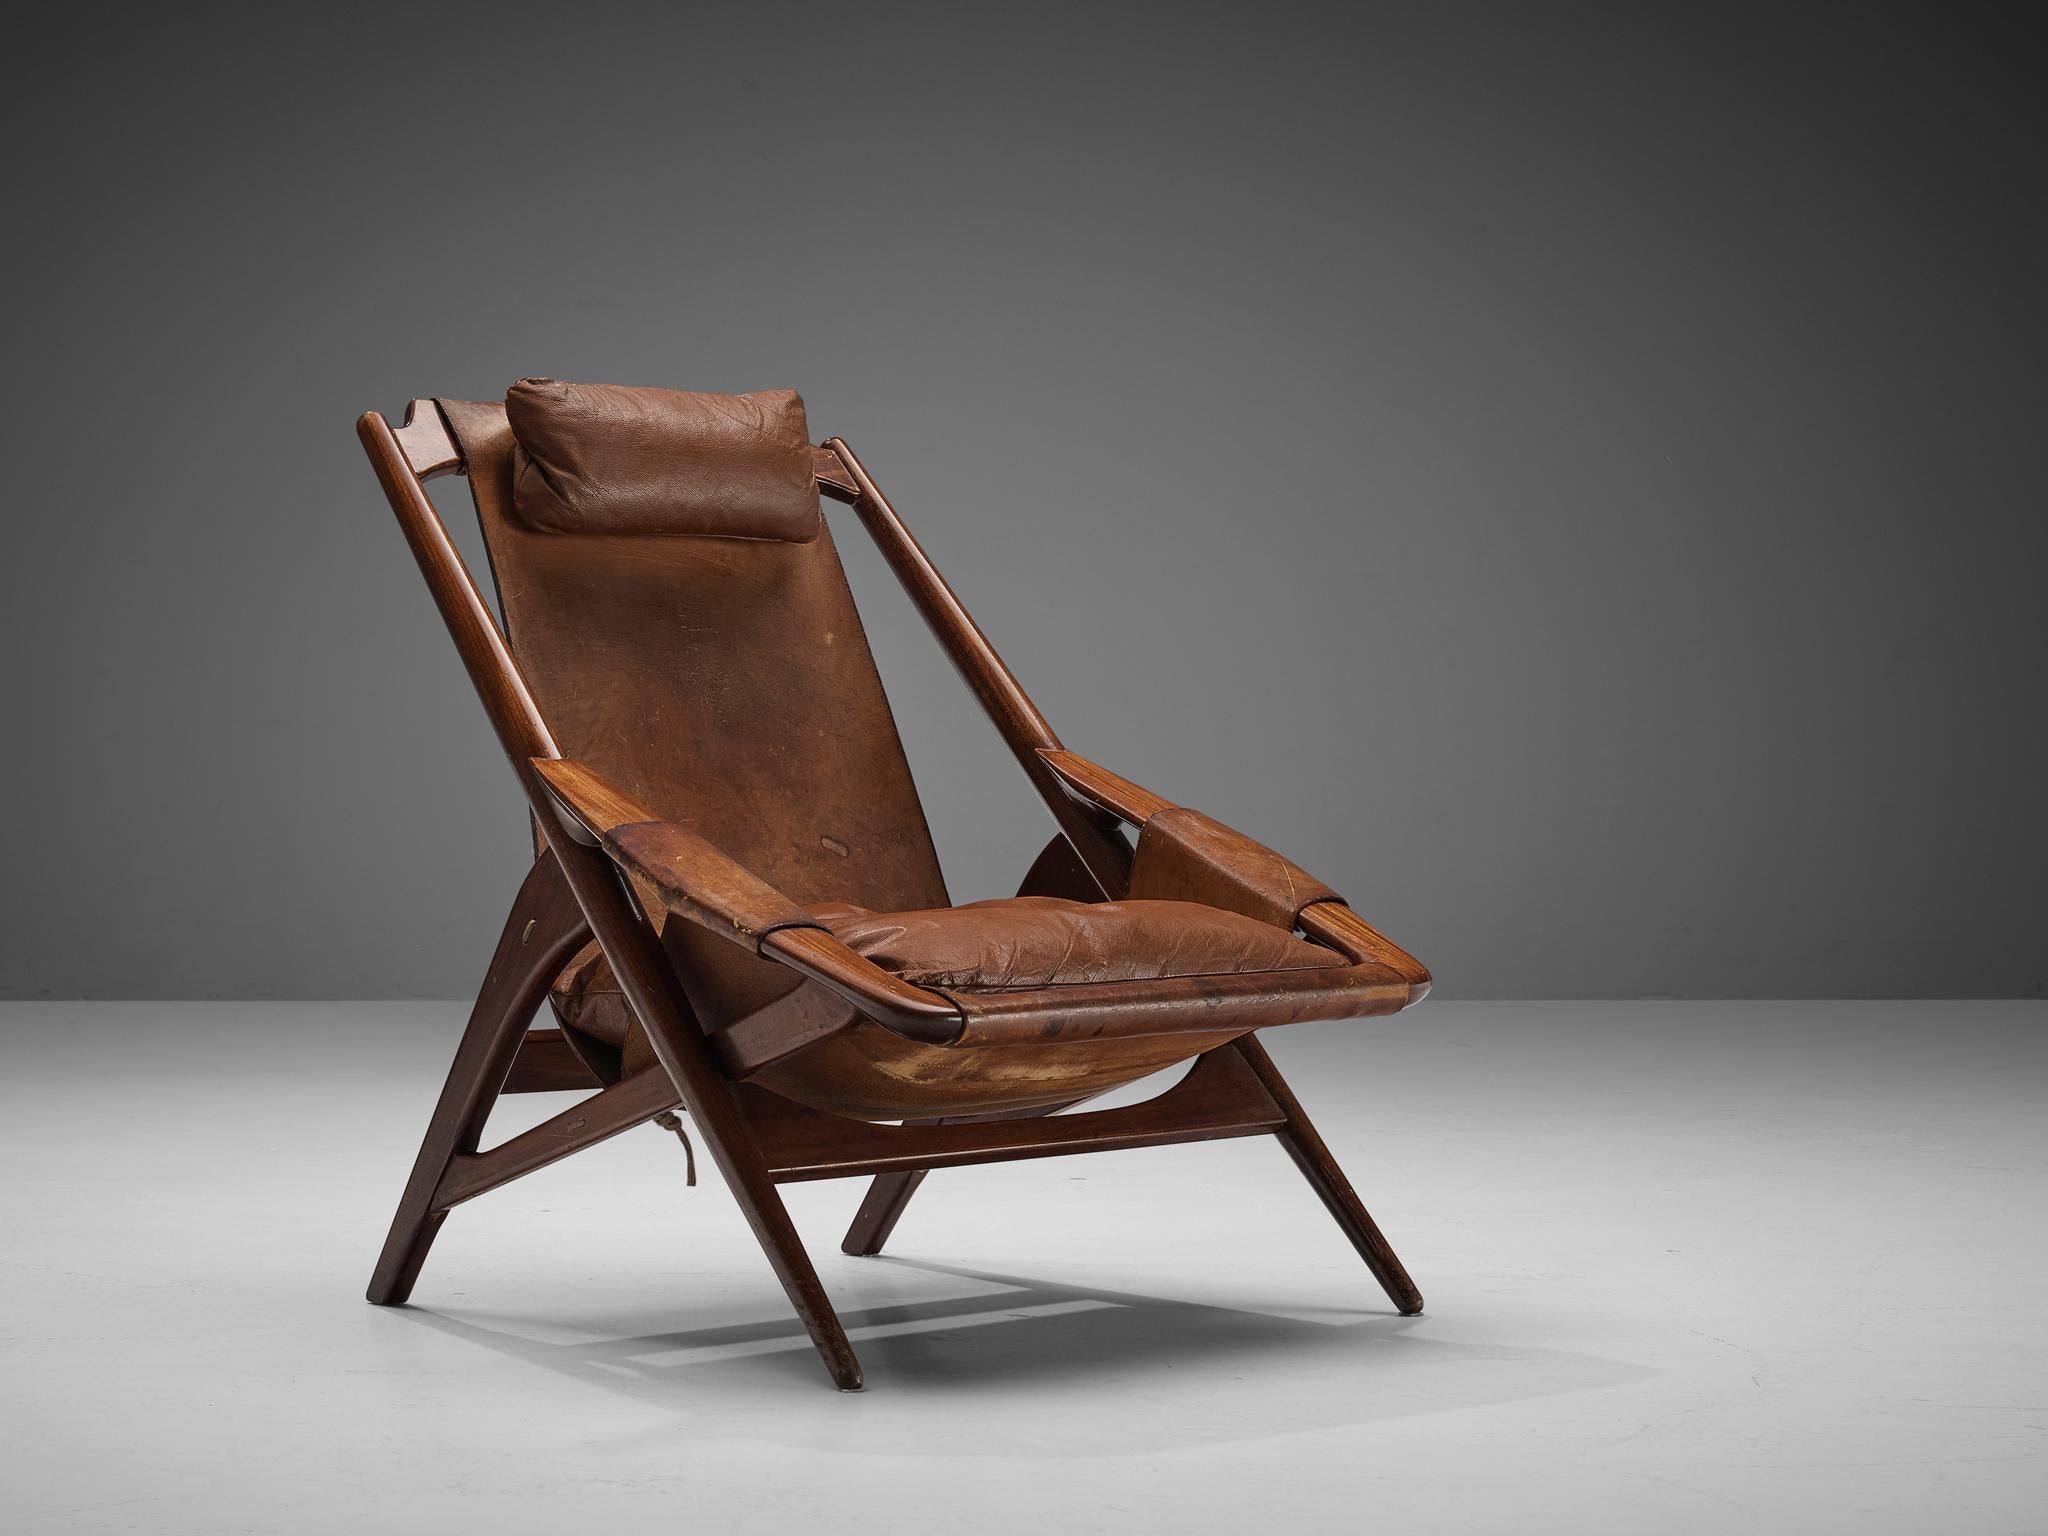 W.D. Andersag, lounge chair, wood, leather, Italy, 1960s.

This chair has a very dynamic appearance by means of the sharp lines discernible in the wooden frame. The solid construction reminds of the sturdy hunting chairs. Thick dark leather is